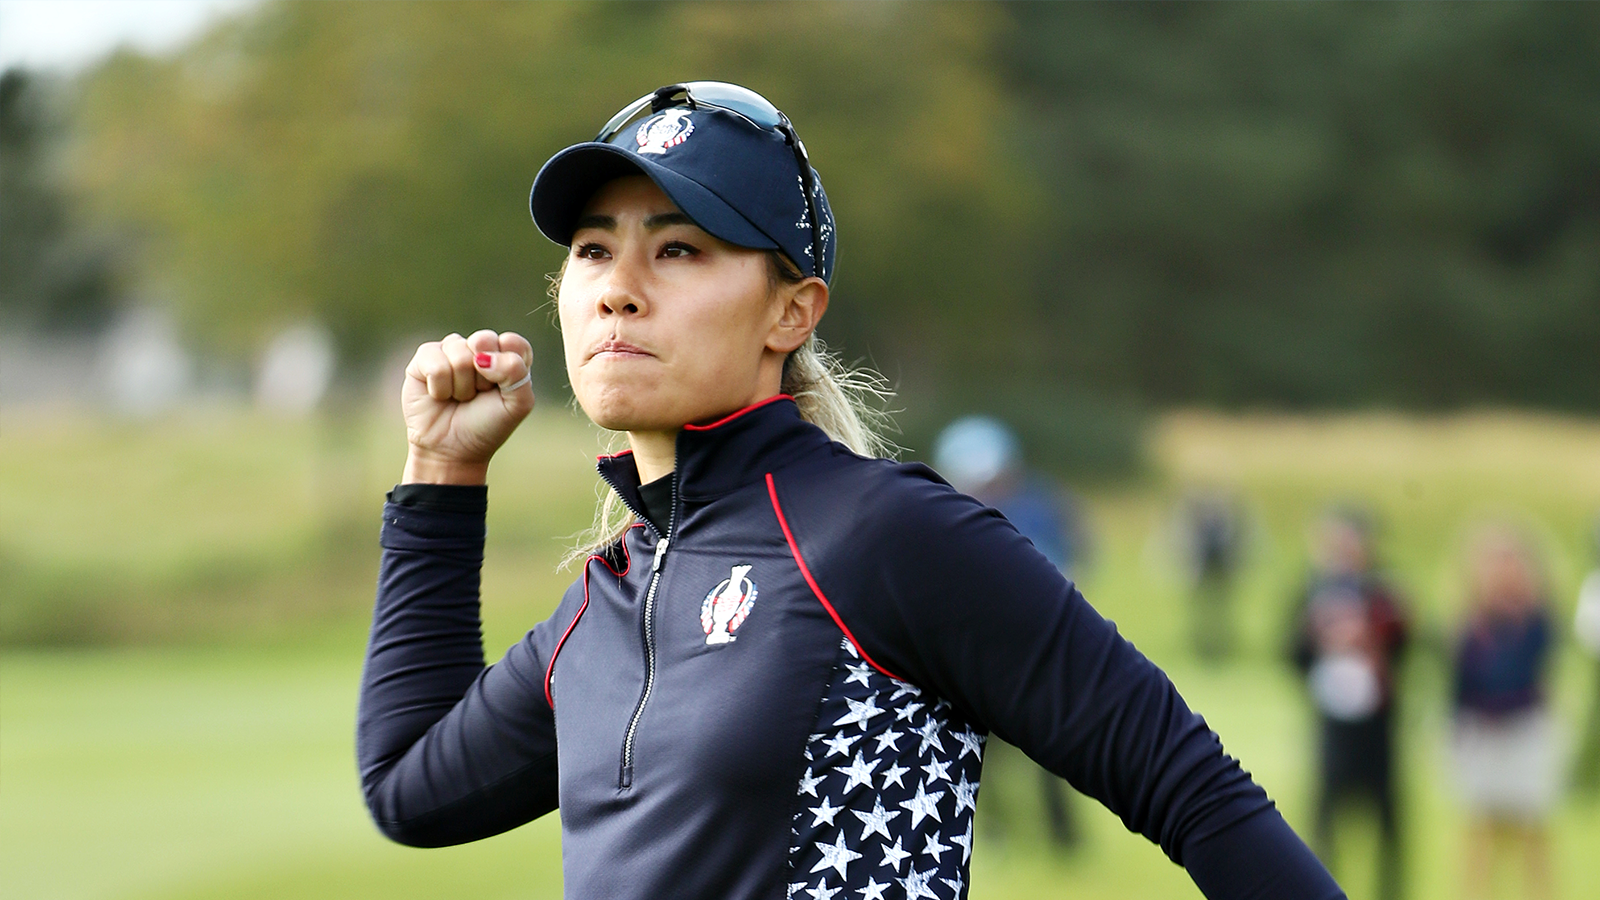 Solheim Cup to Move to Even Years Starting in 2024